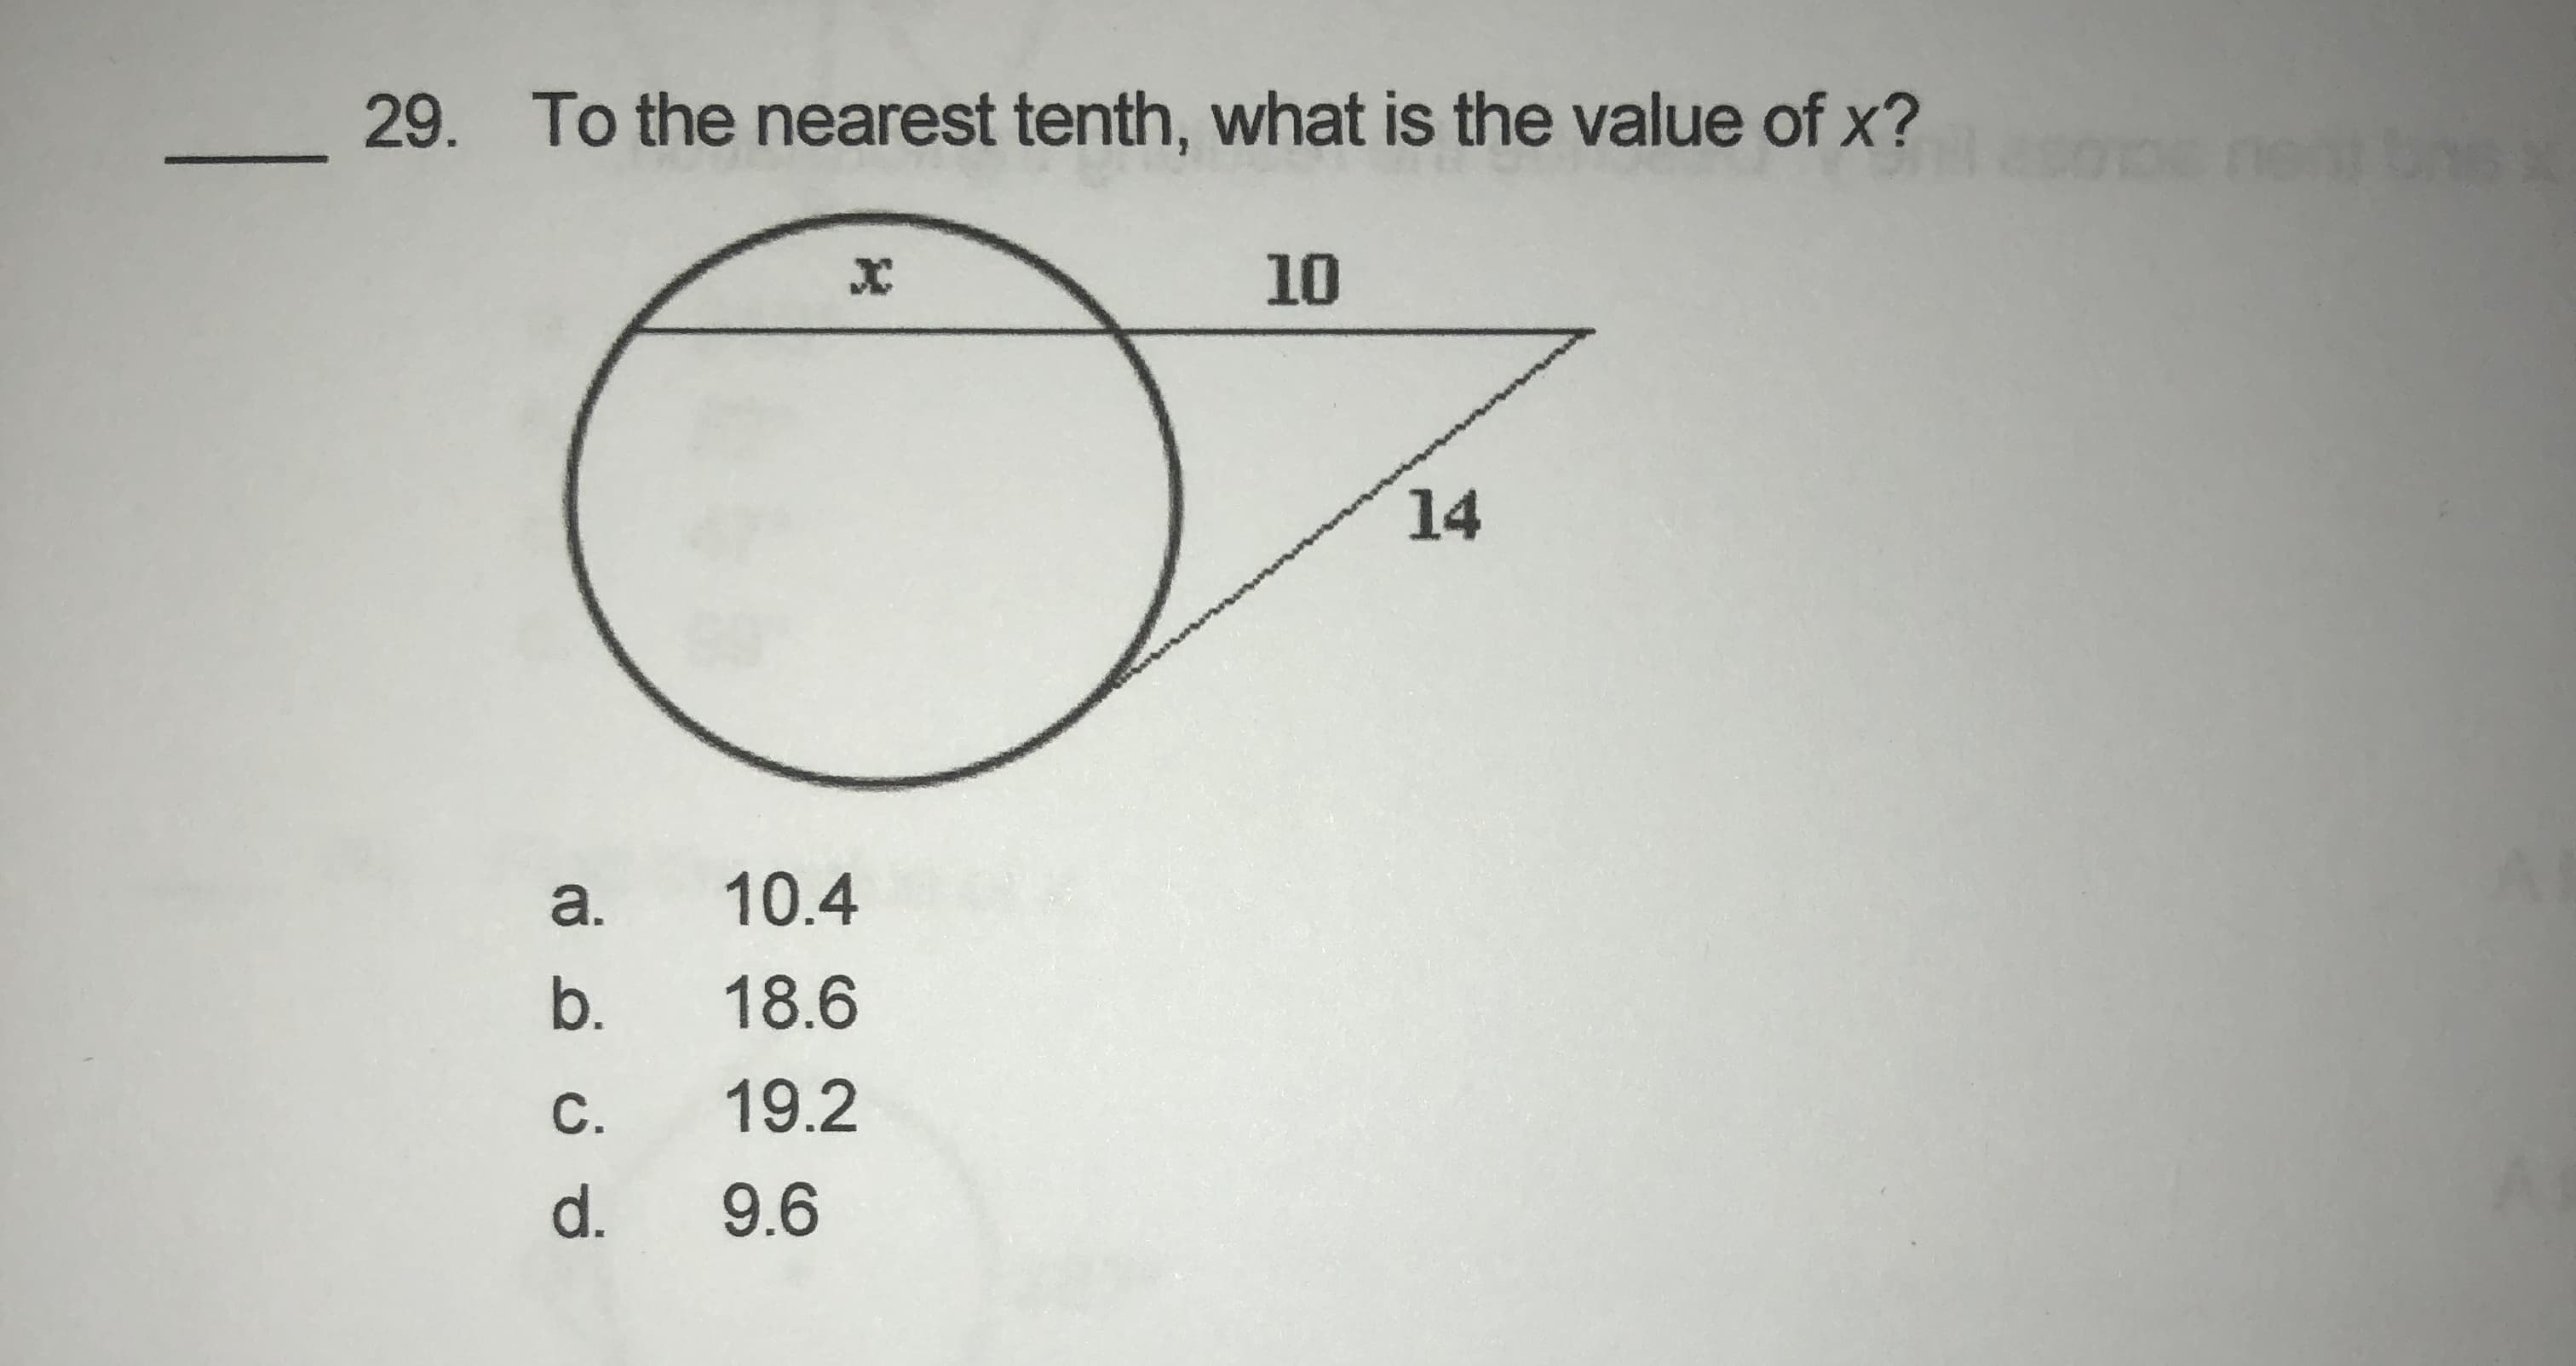 29. To the nearest tenth, what is the value of x?
10
14
